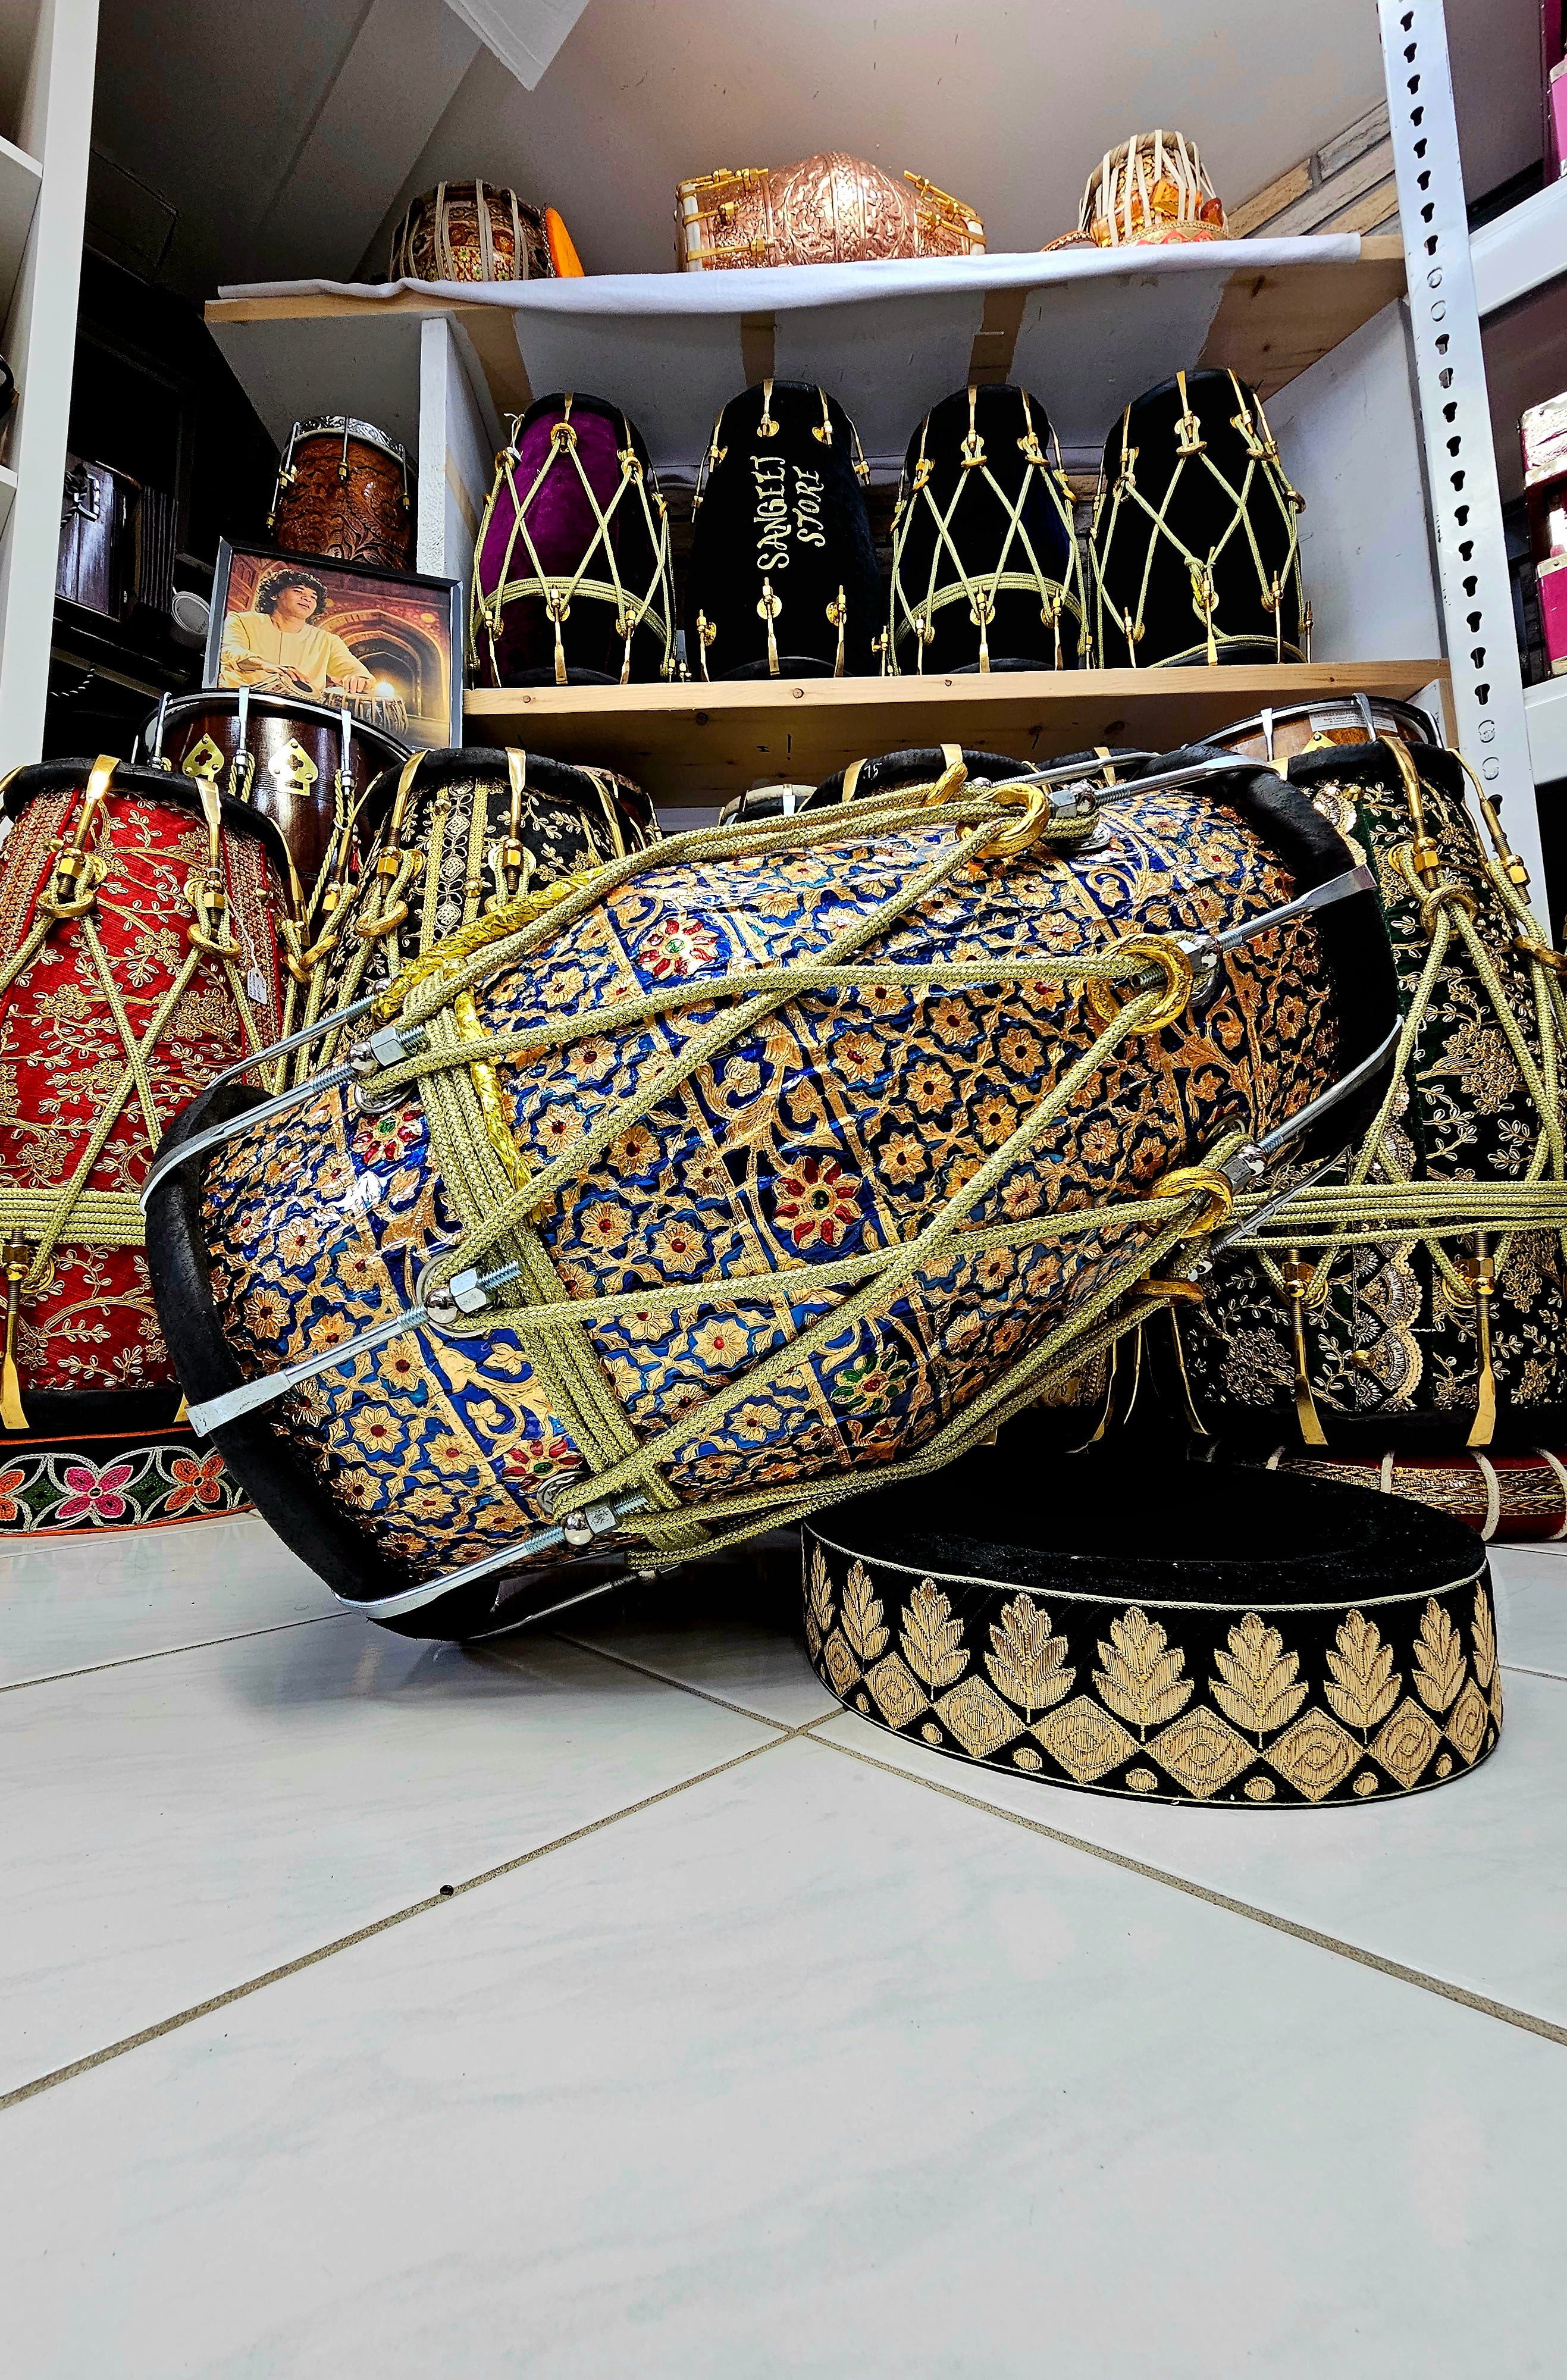 Harmony in Hues: Blue and Gold Designer Wrapped Red Sheesham Dholak with Black Skins and Chrome Bolts (BLACK FRIDAY SALE!)